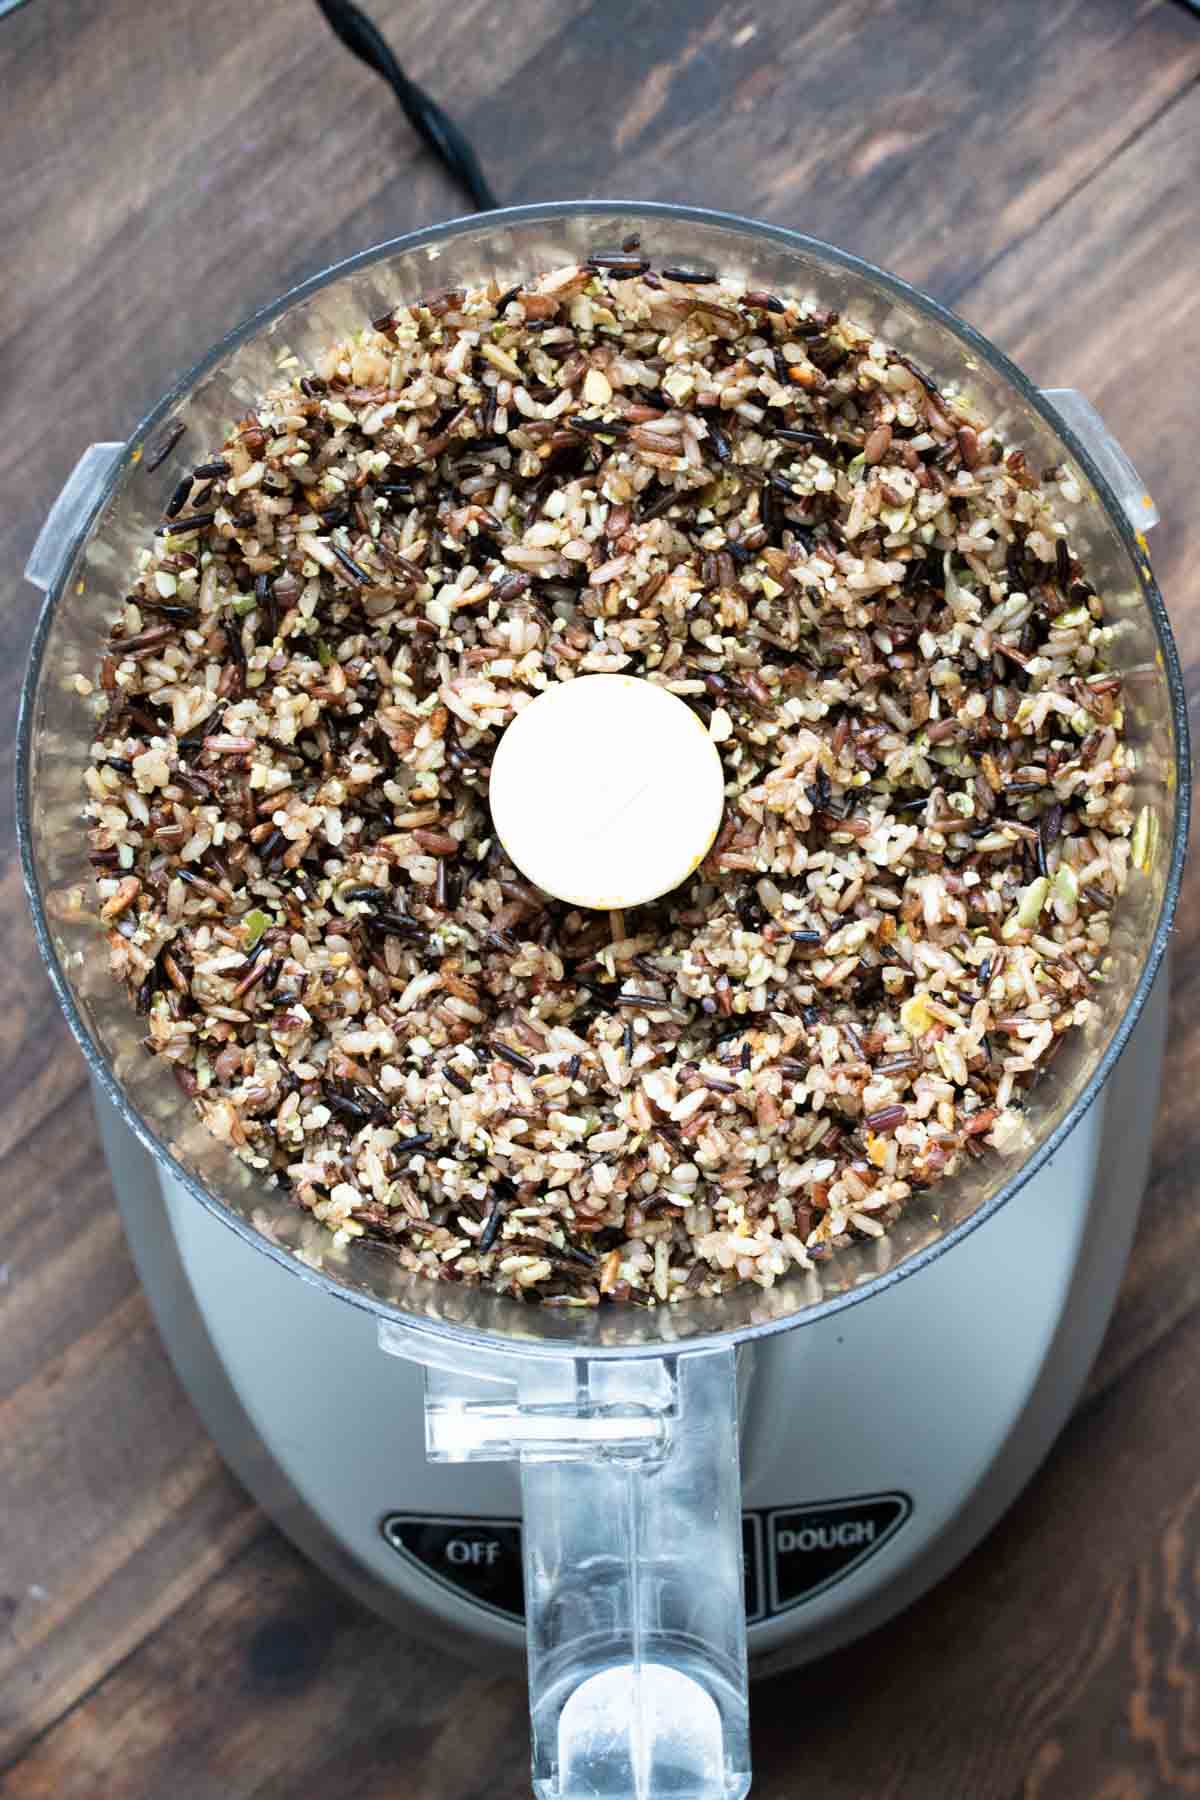 Top view of a food processor with wild rice mixture in it.